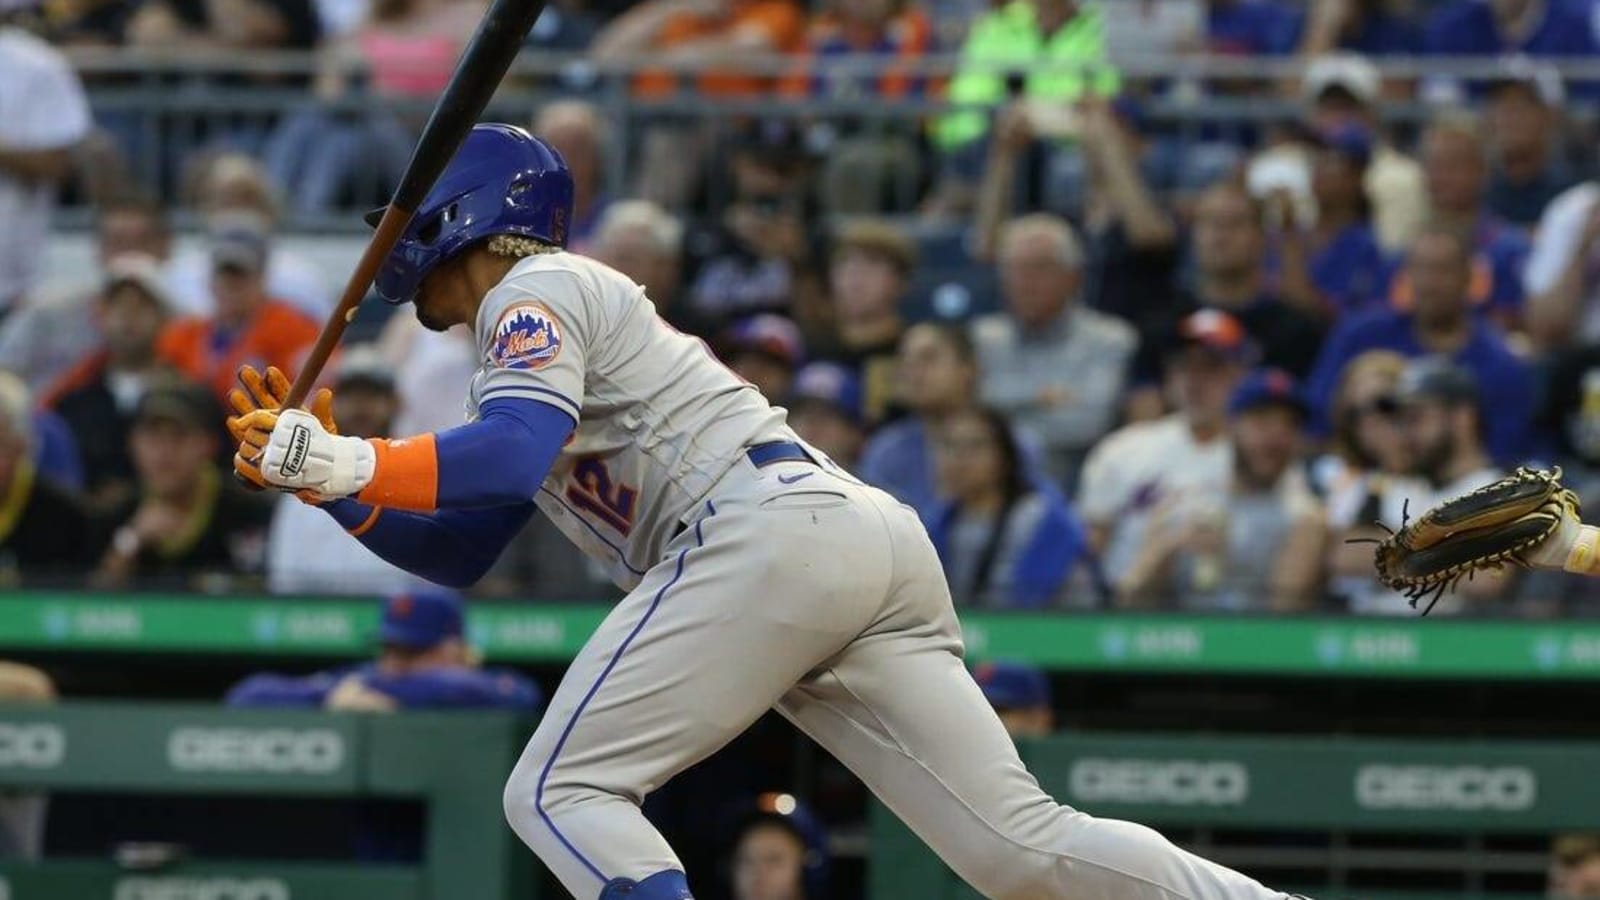 Mets bring narrow division lead to Miami